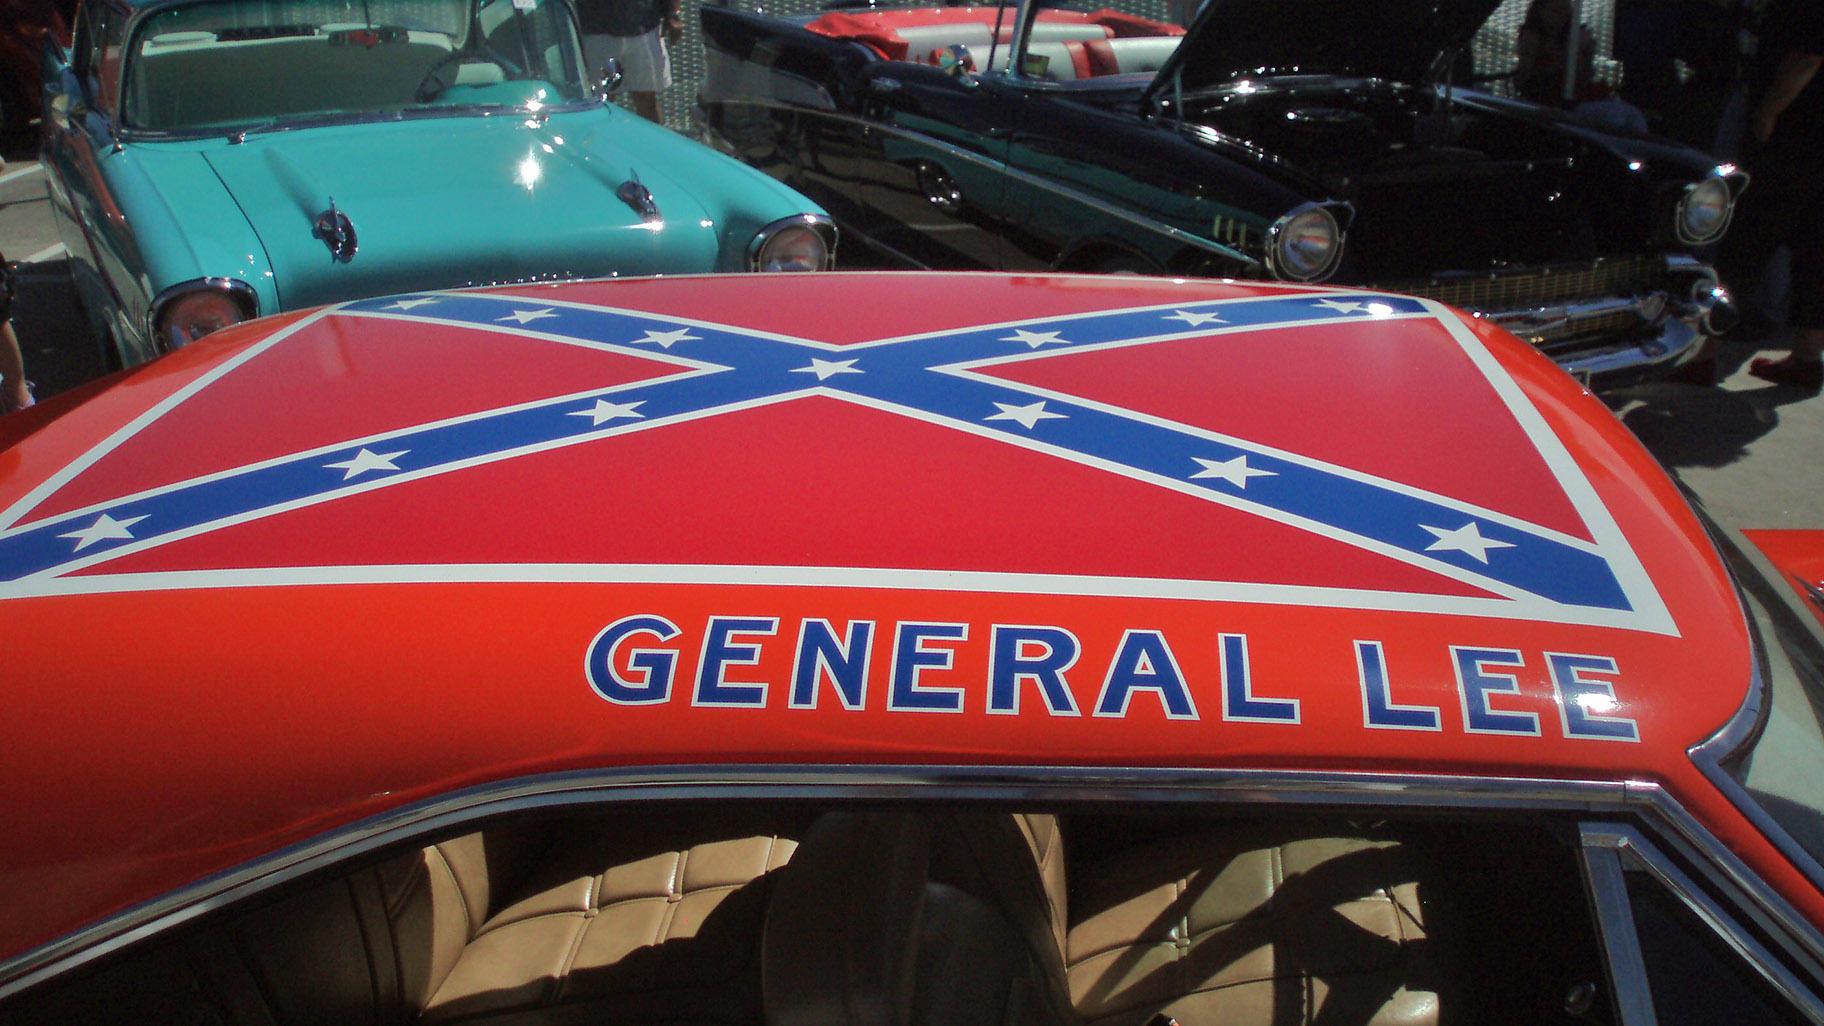 Museum: 'Dukes of Hazzard' Car With Confederate Flag to Stay | Chicago News  | WTTW